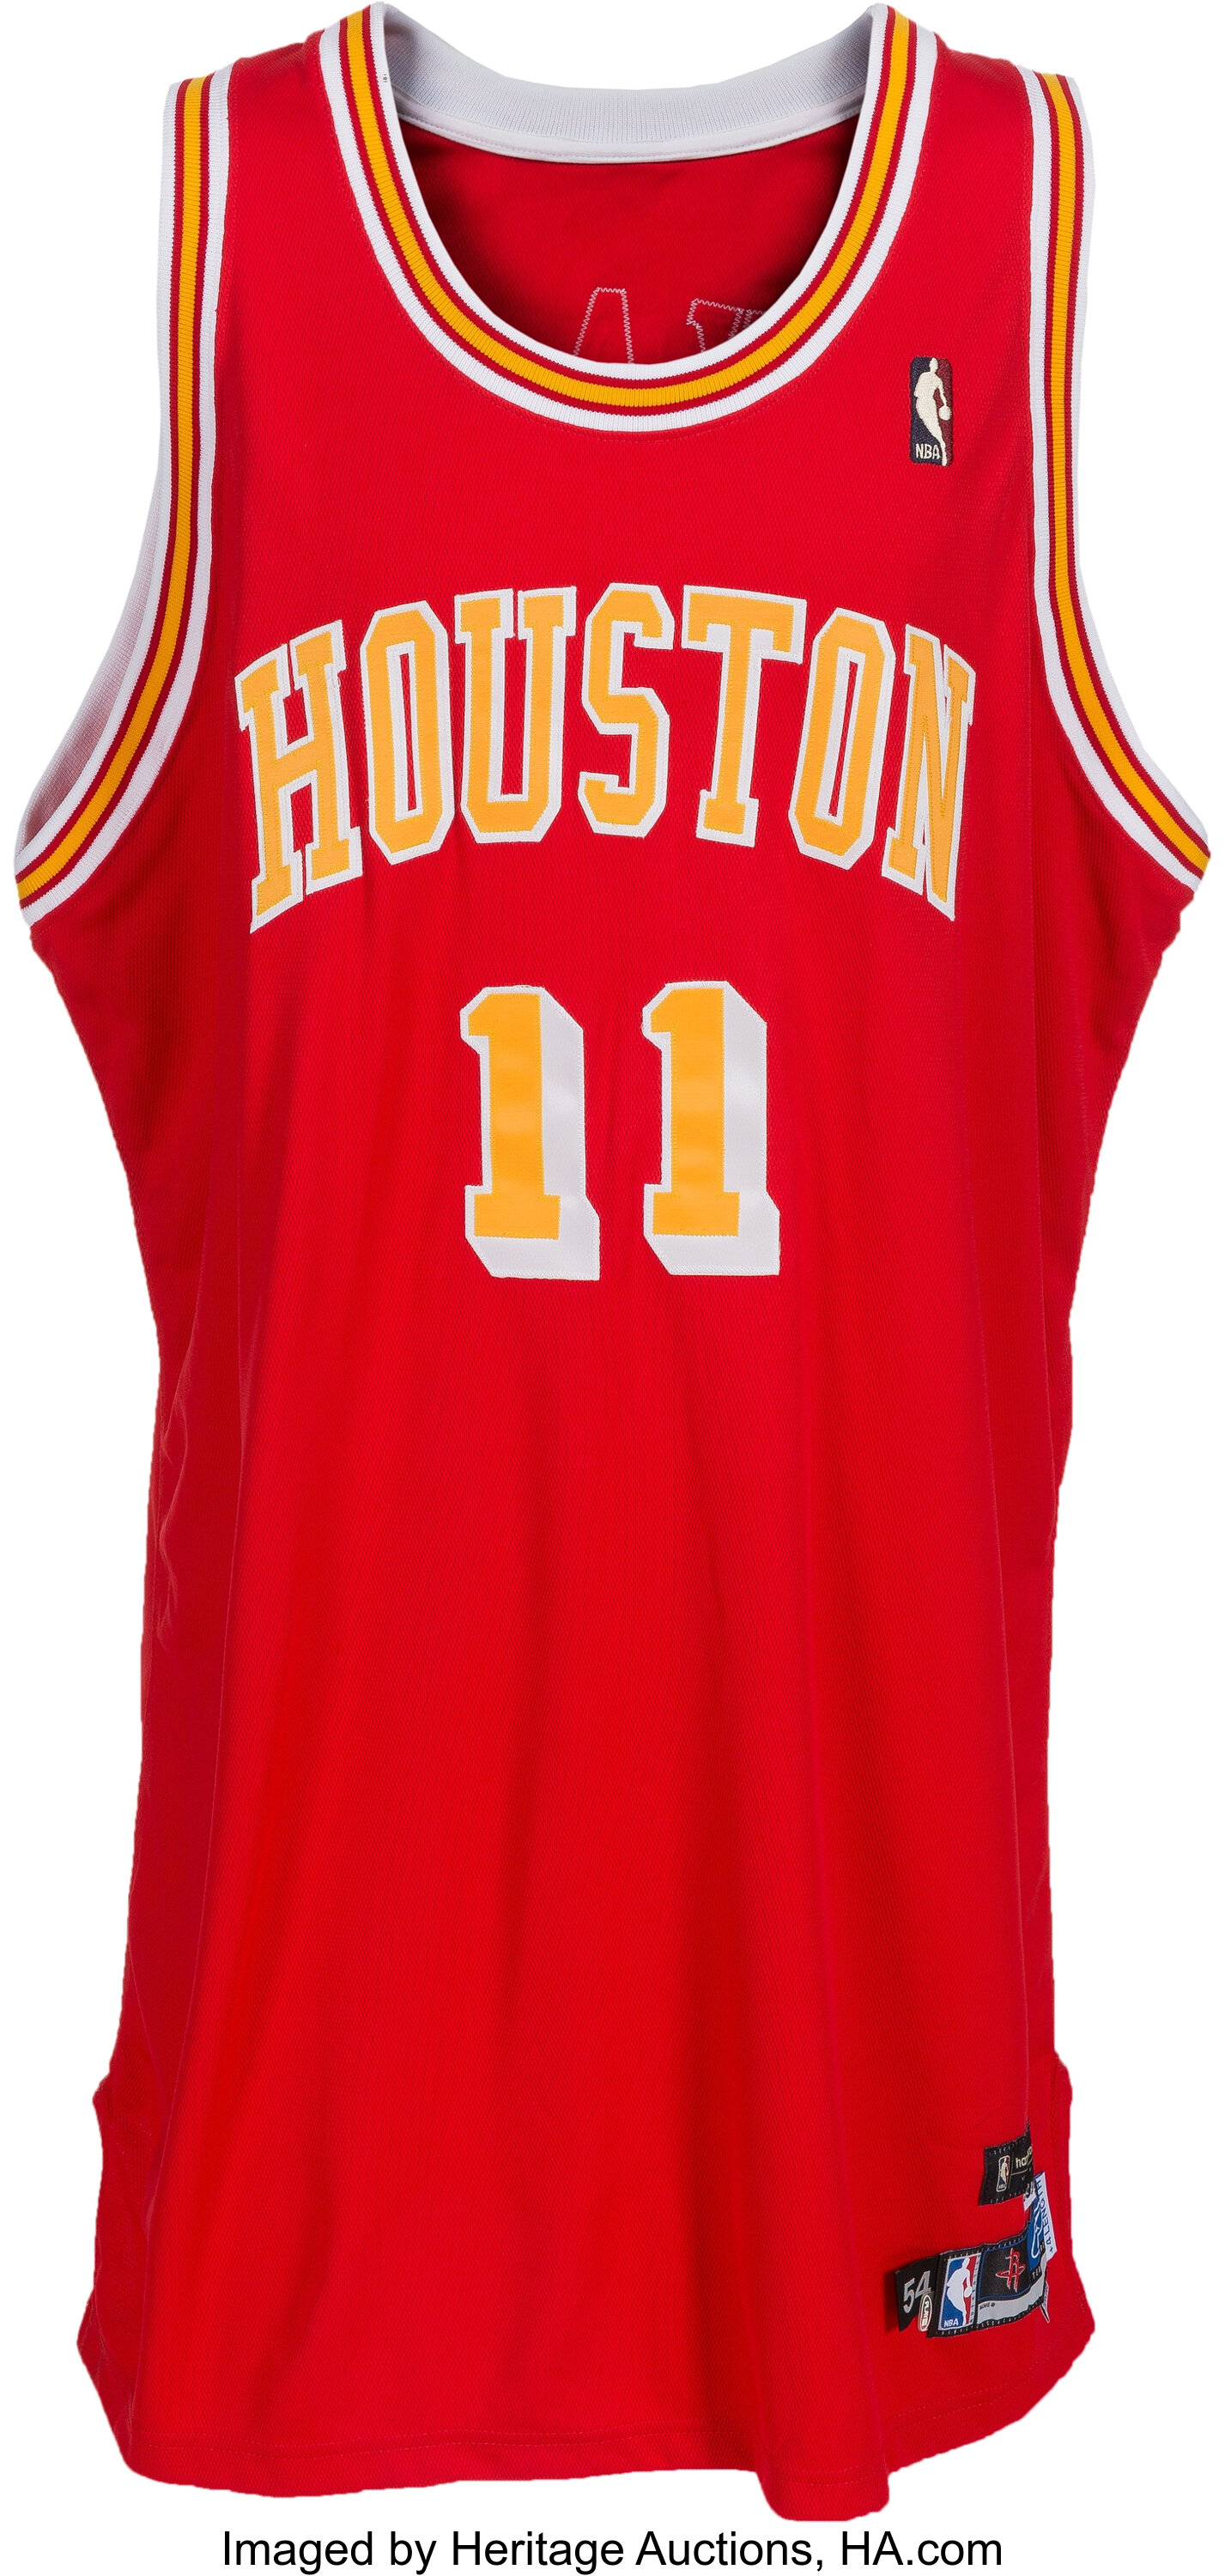 Yao Ming Signed Houston Rockets Away/Red Jersey